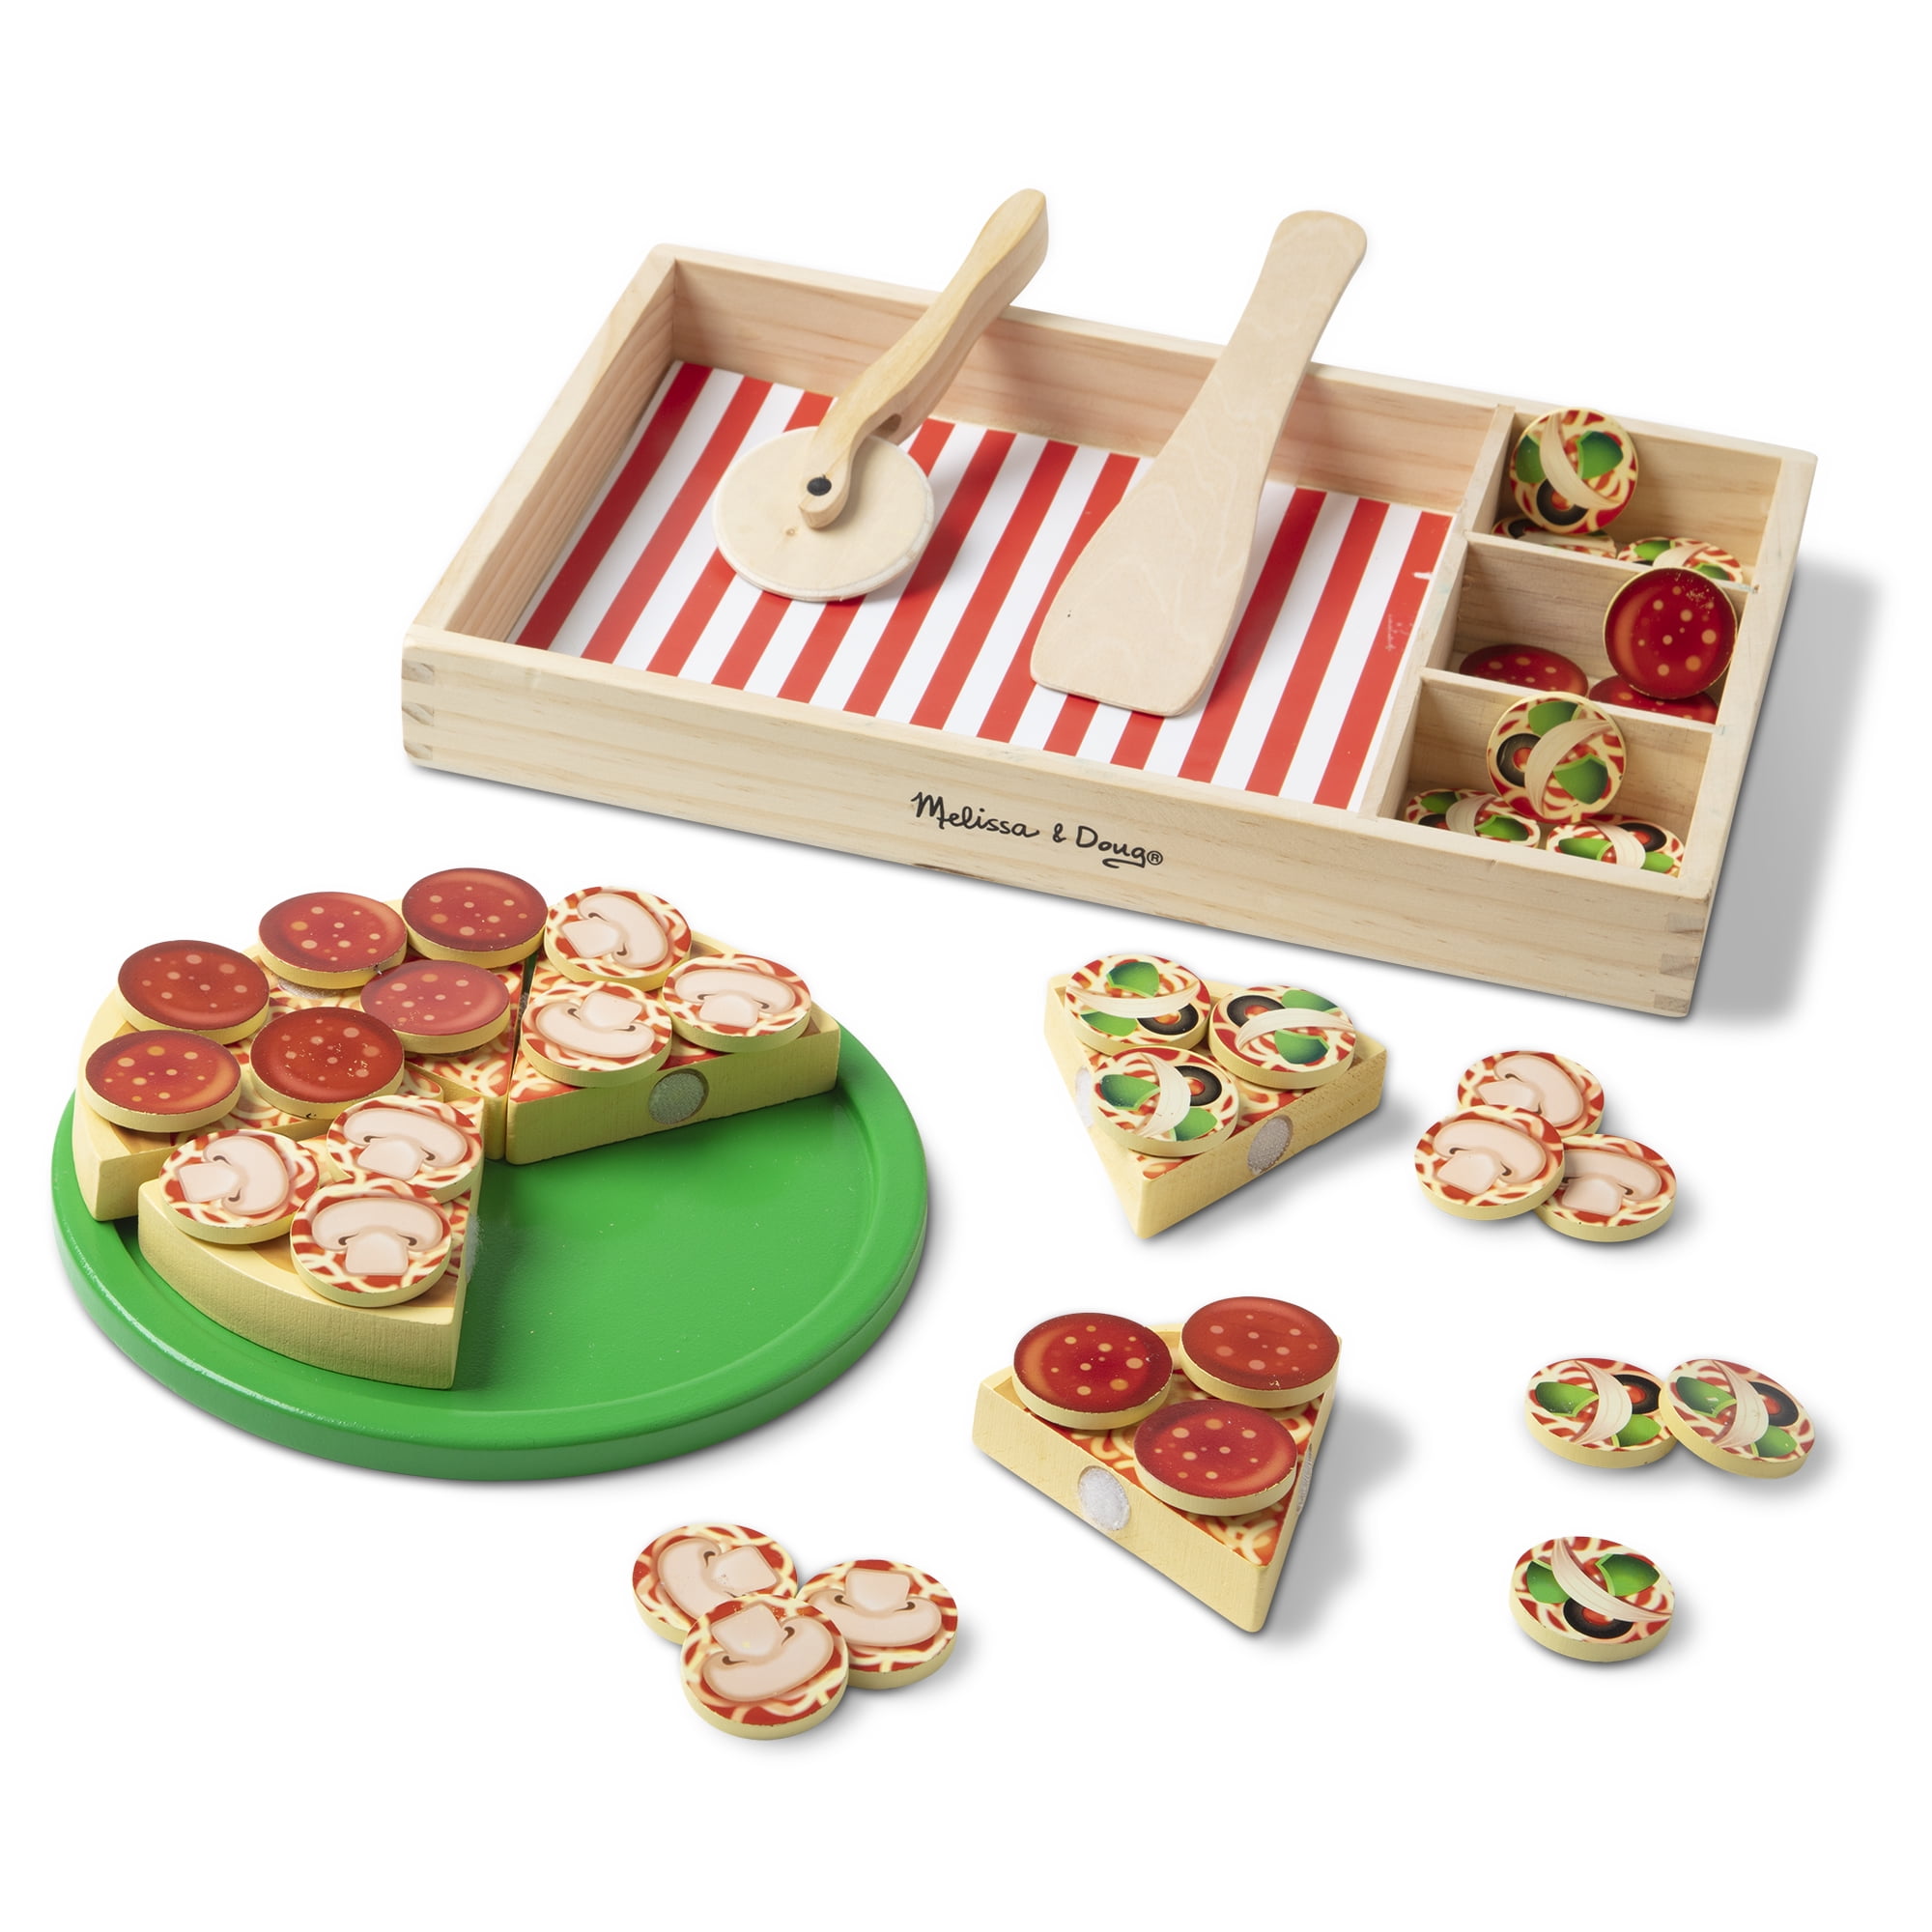 Details about   New Melissa & Doug 17-Piece Deluxe Wooden Cooktop Set With Wooden Play Food New 